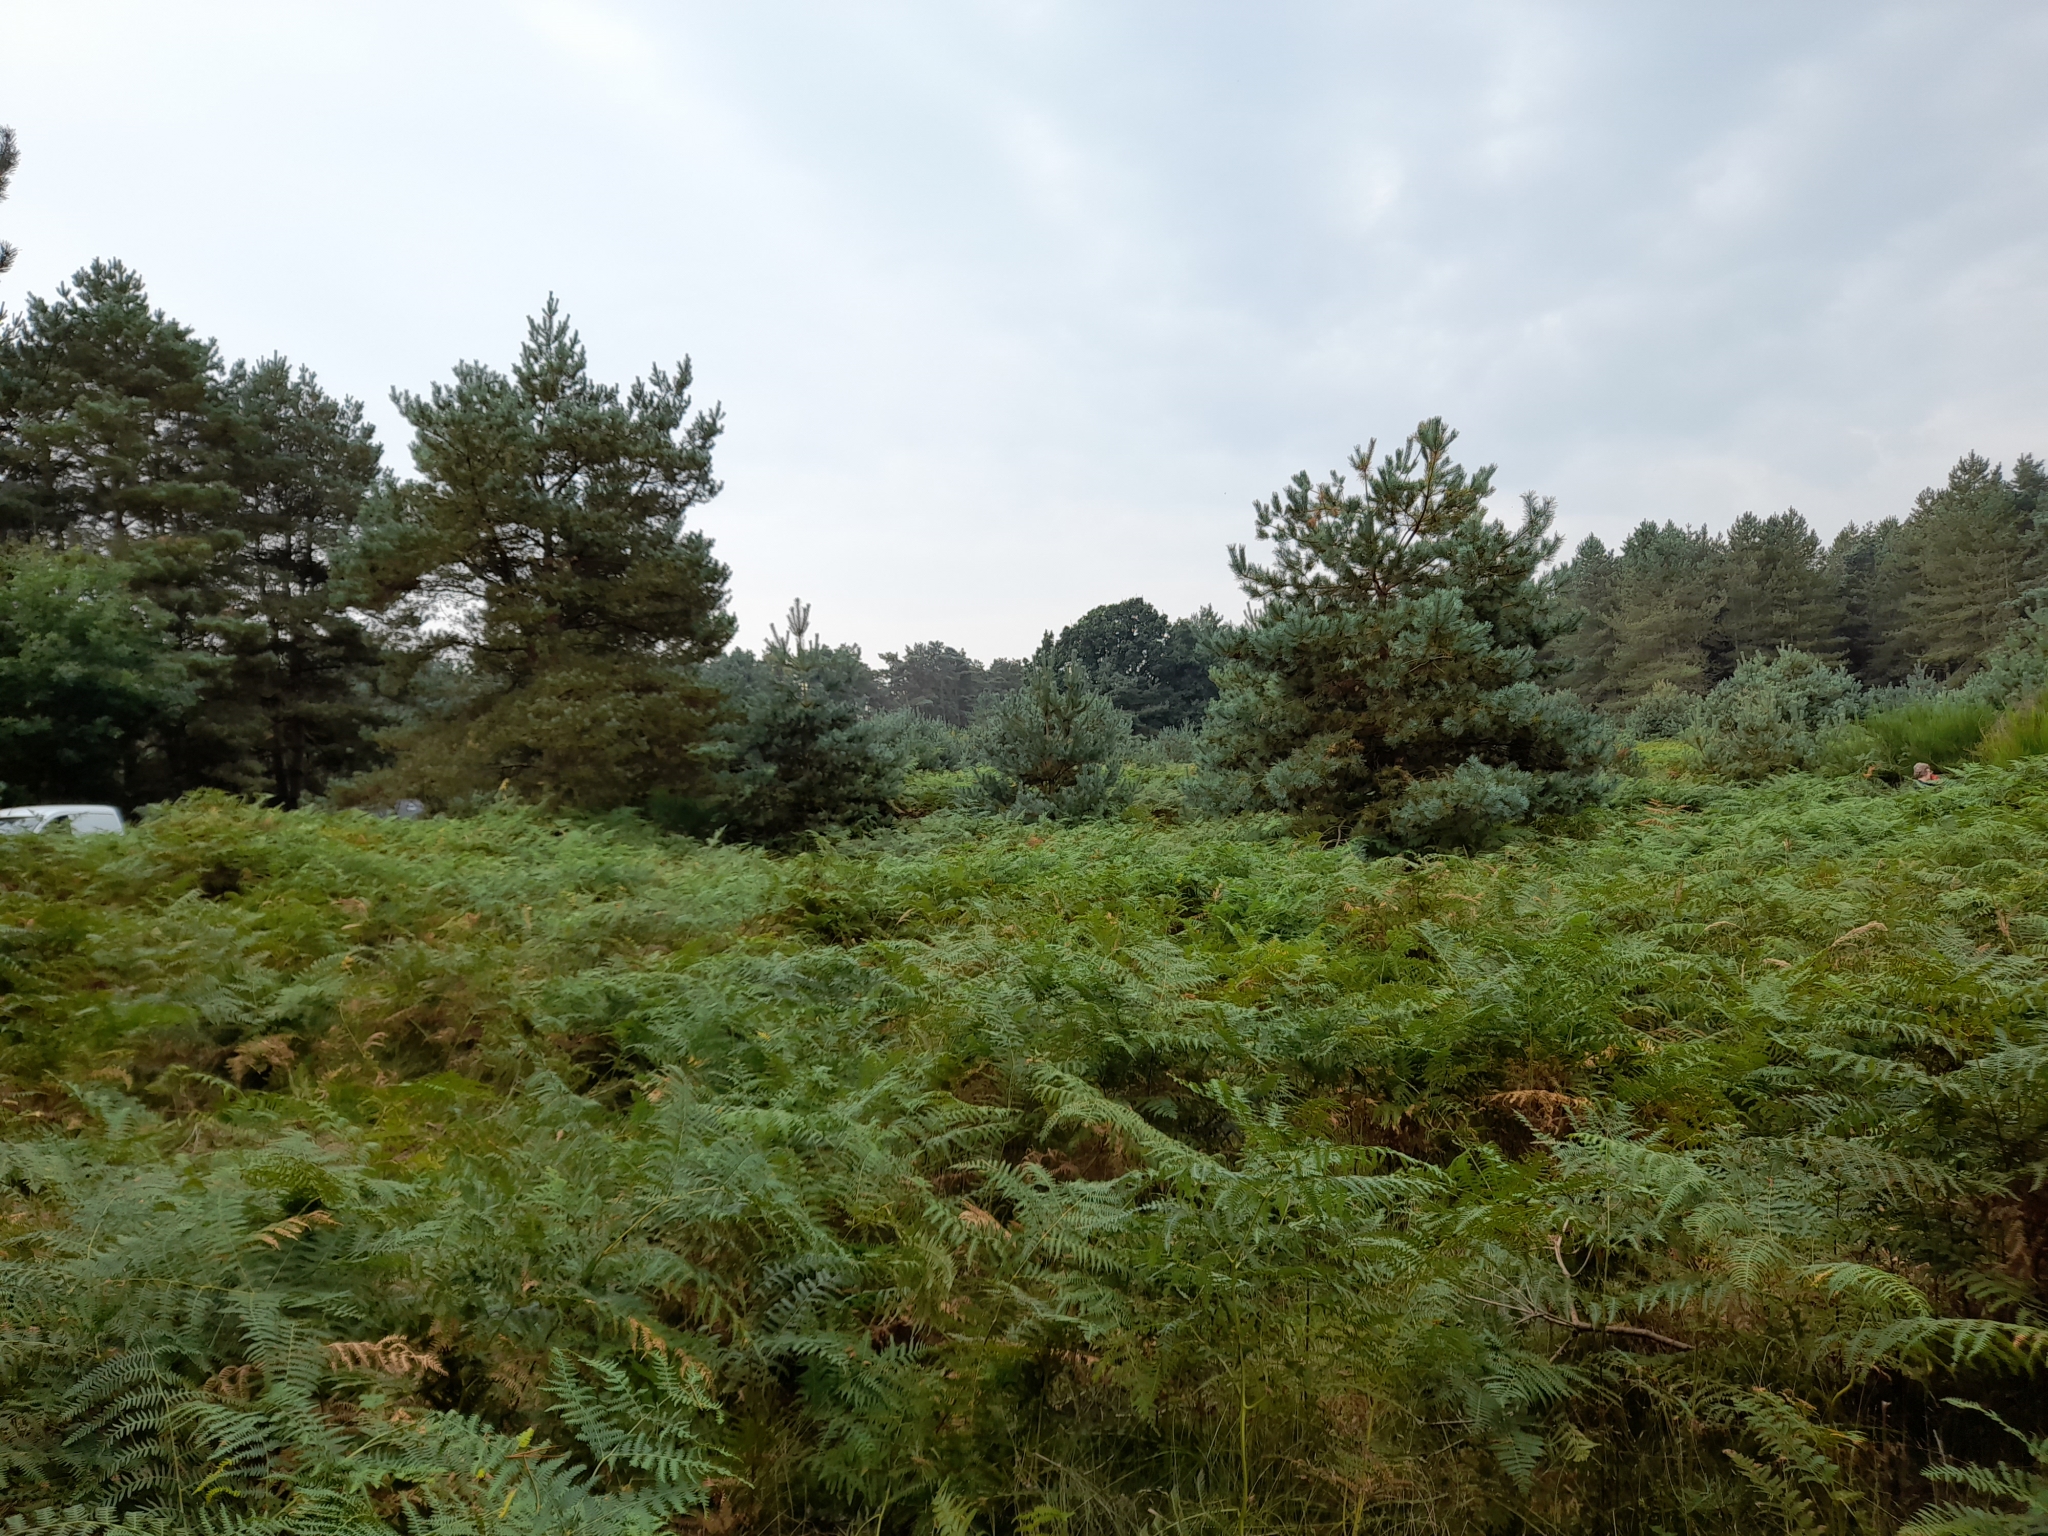 A photo from the FoTF Conservation Event - September 2021 - Brash Clearance at the Goshwak Trail : Looking out from the Goshawk Trail into a large patch of Bracken